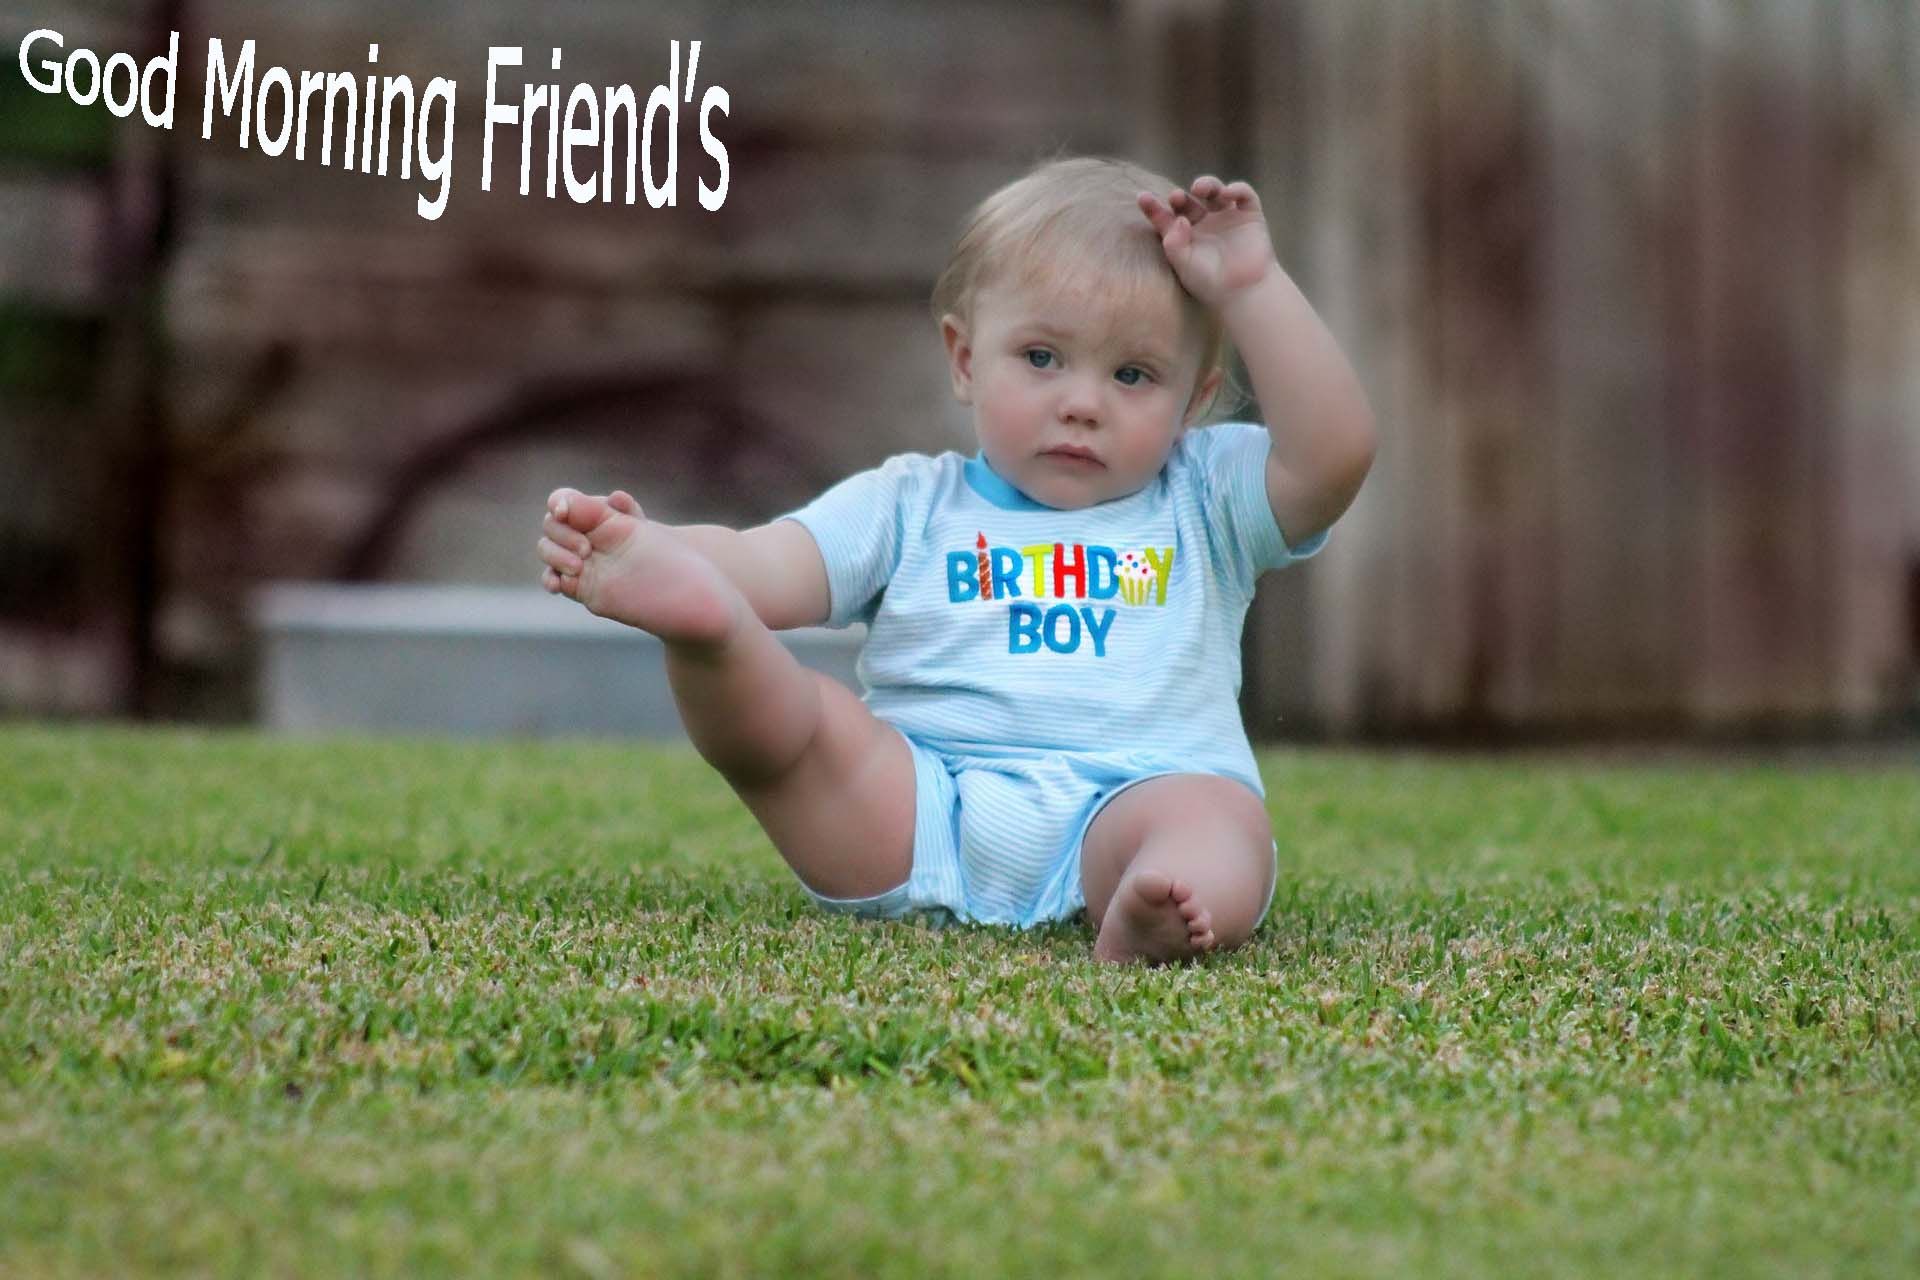 Good Morning Friends Wishes Hd By Cute Baby Wallpaper - Infant - HD Wallpaper 